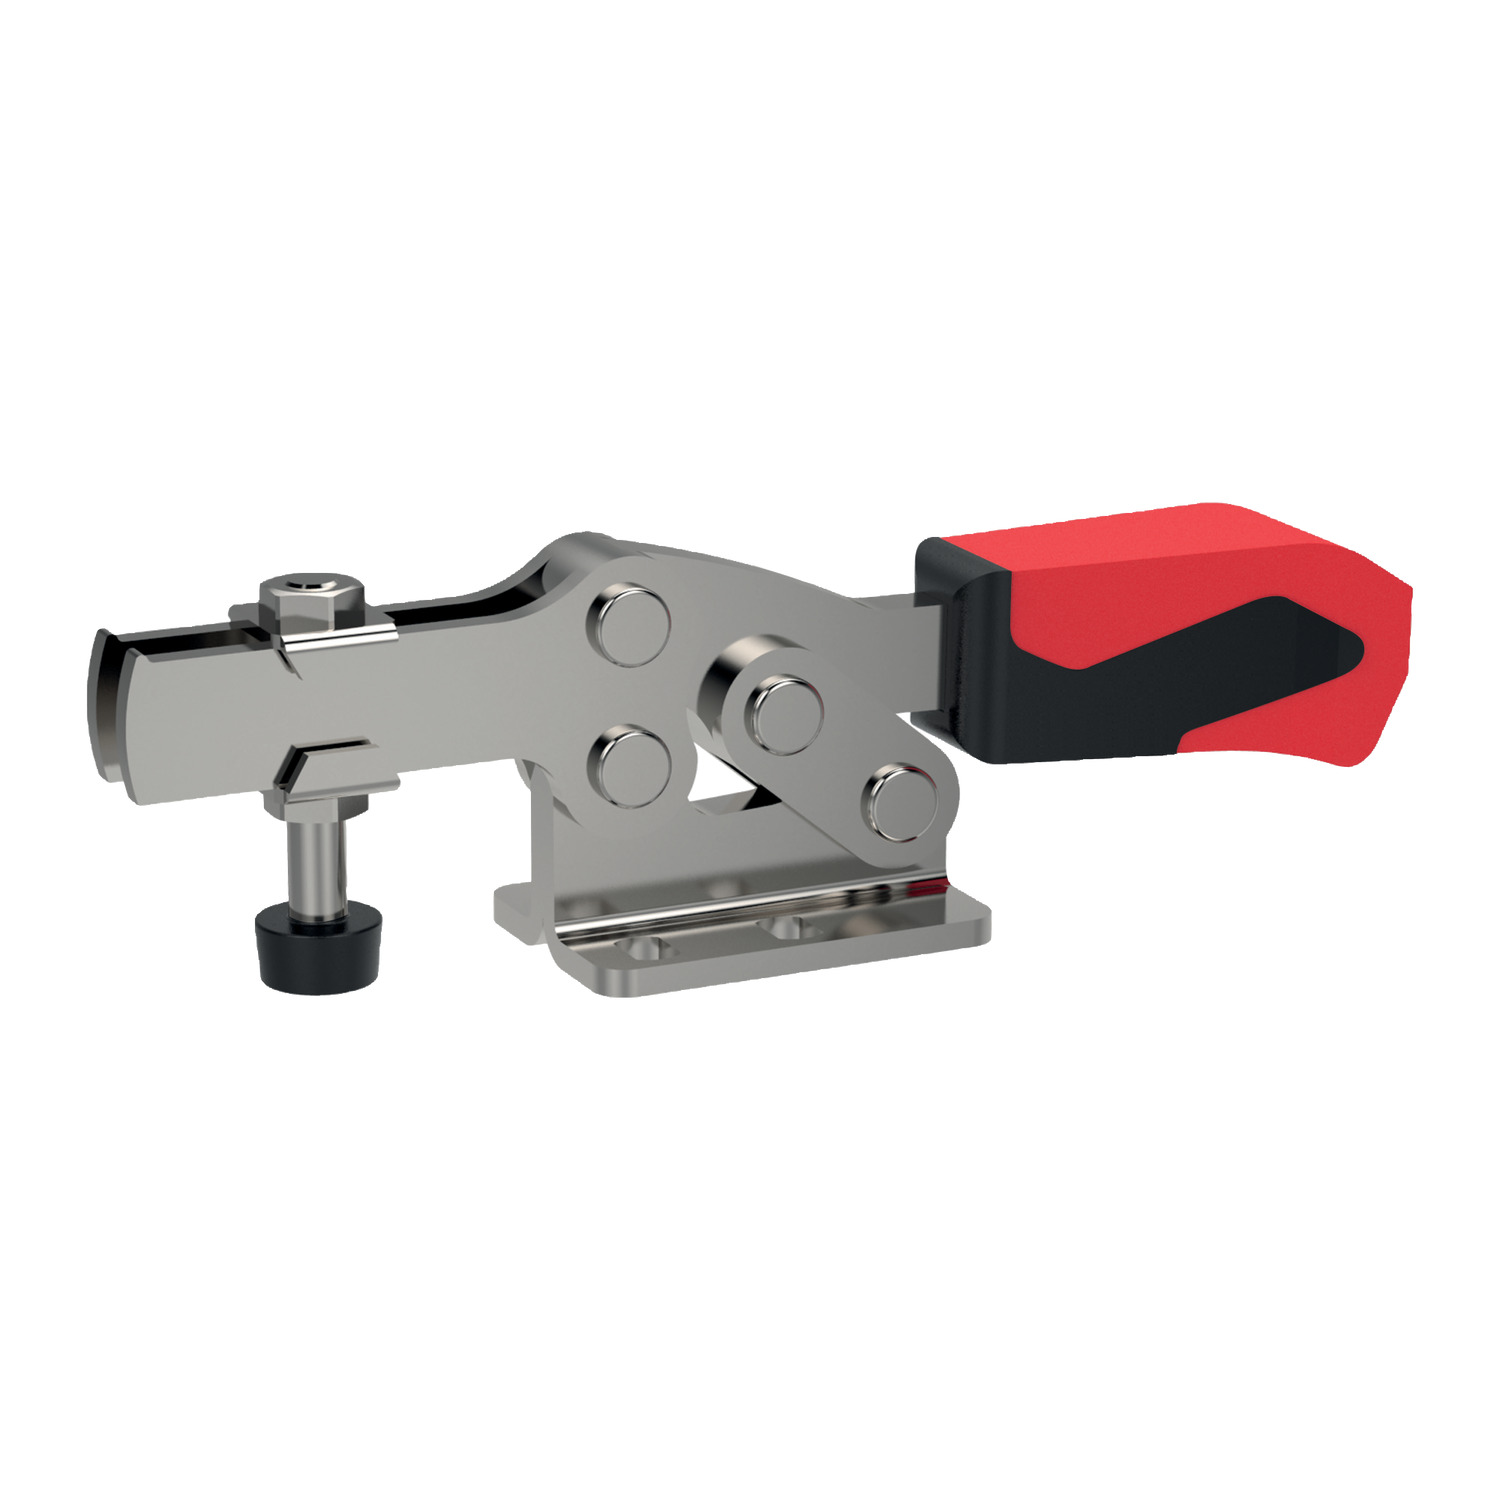 41001.W0301 Horizontal Toggle Clamp Plus increased clamping force - 1 - 1,1 - 1,7 - M 5x35